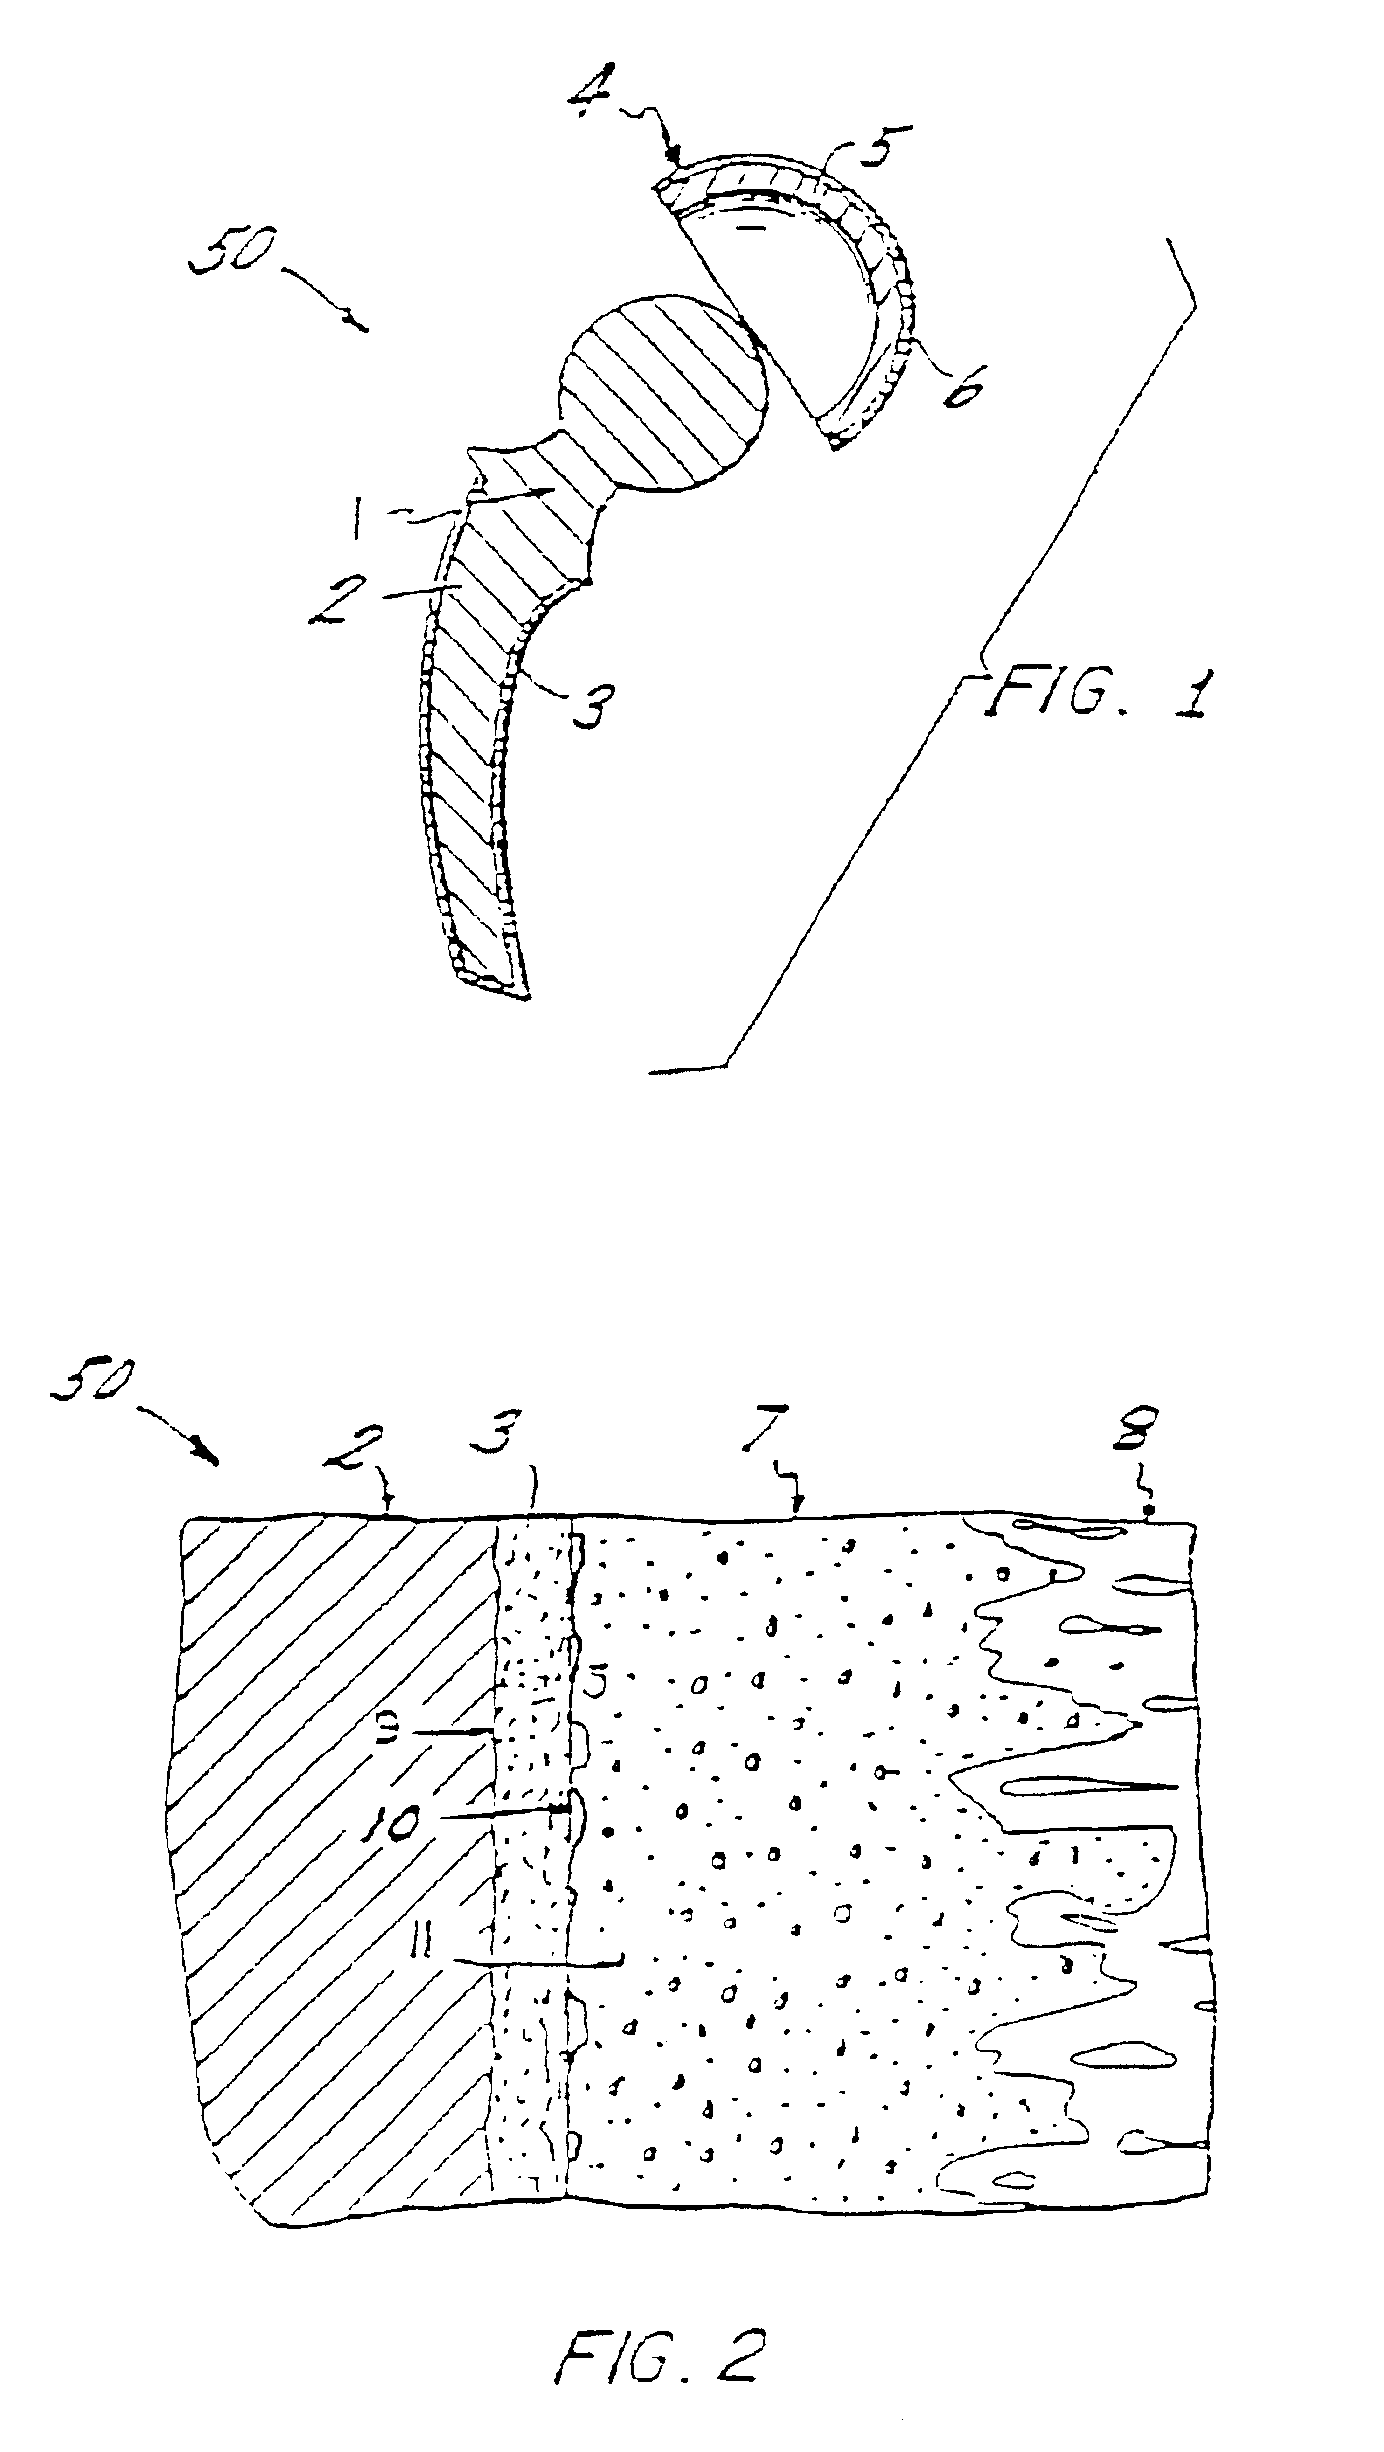 Bone connective prosthesis and method of forming same